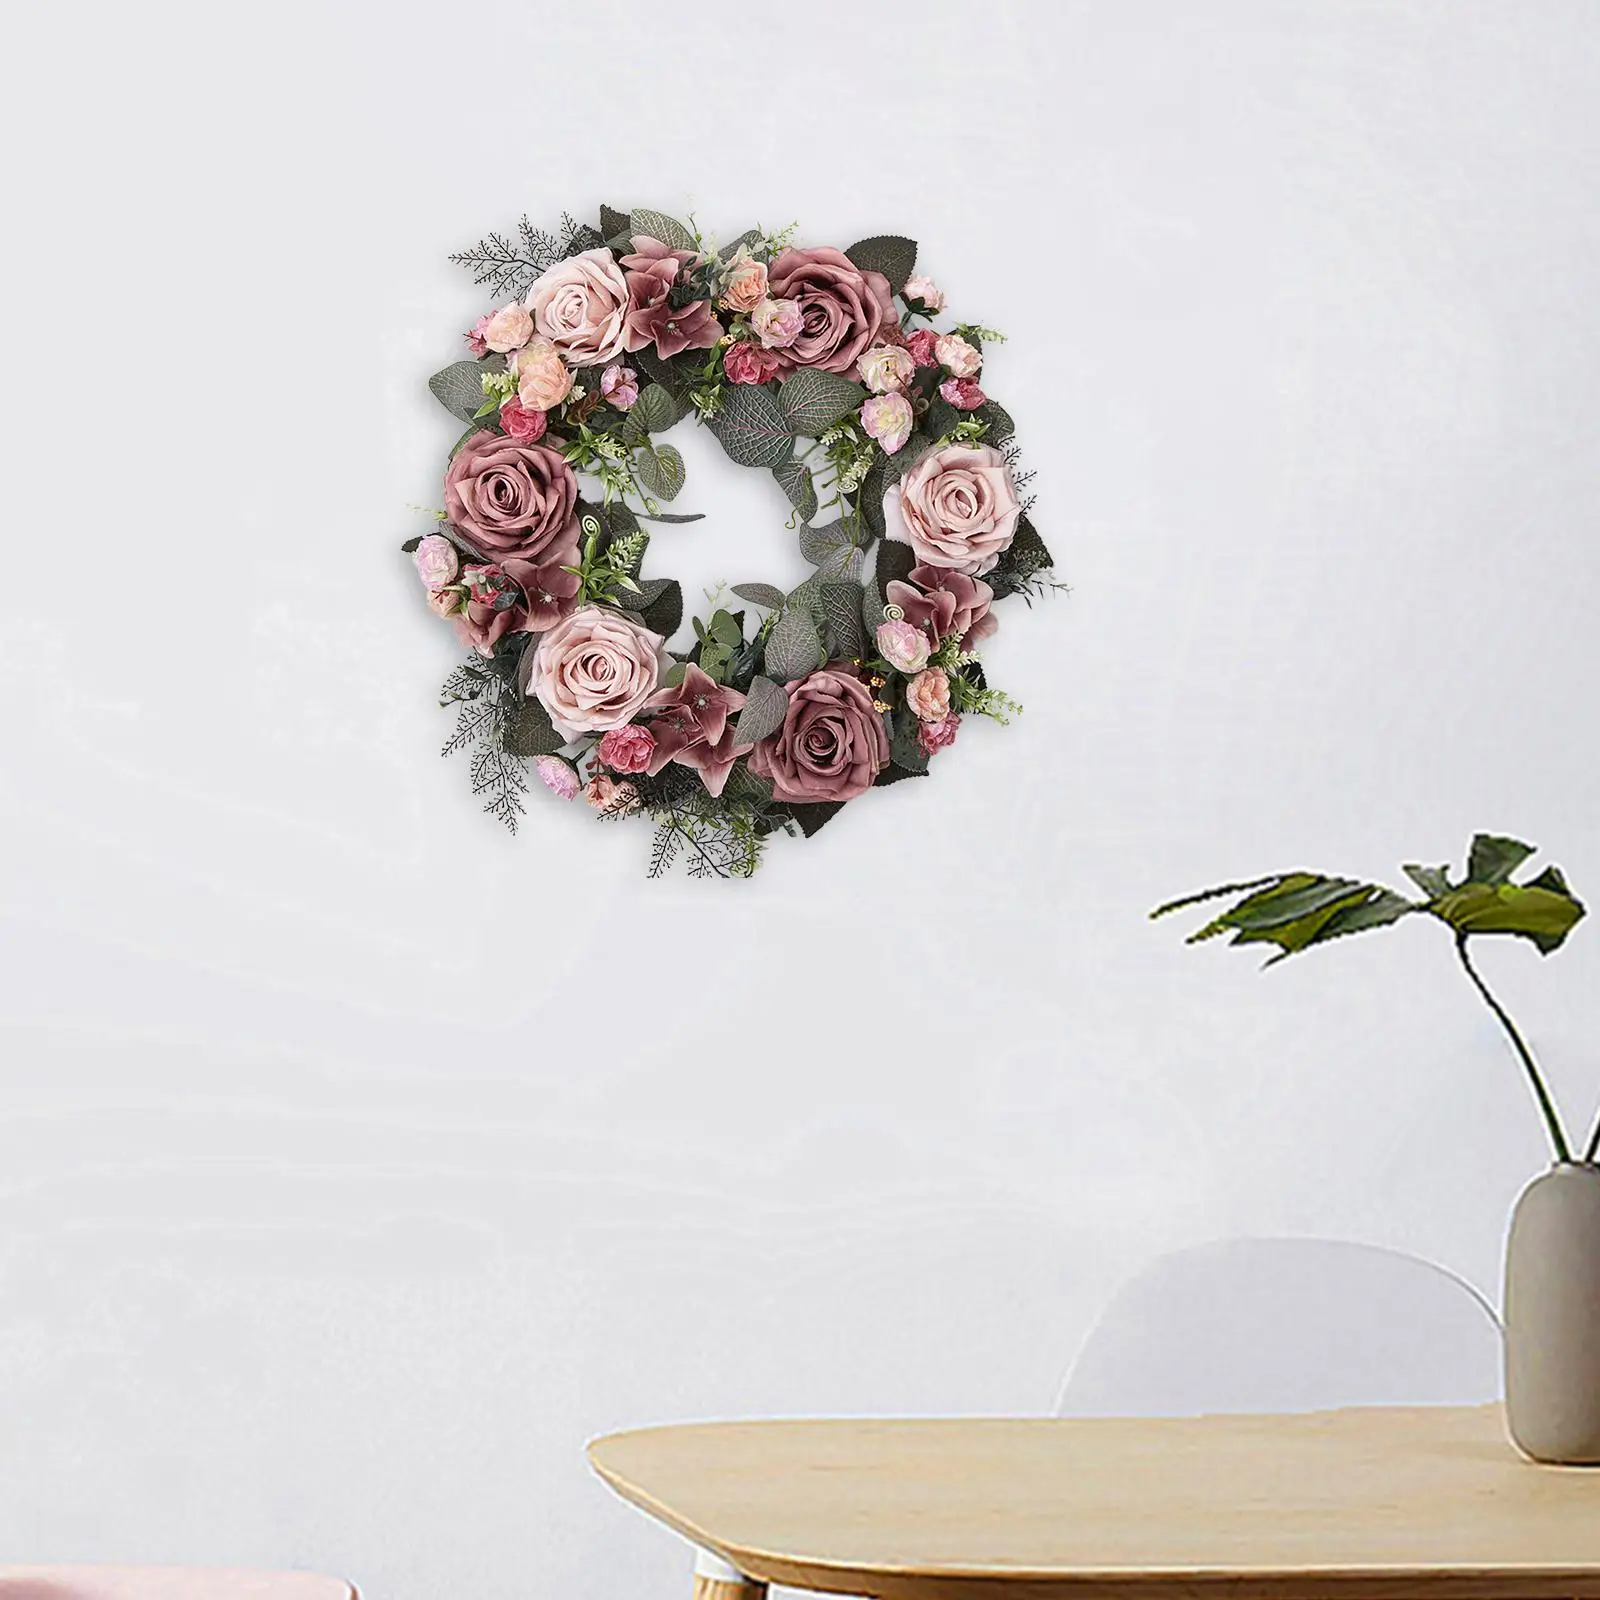 Handmade Artificial Wreath Photography Props Garland Hanging Wreath Floral Swag for Party Window Home Farmhouse Decor